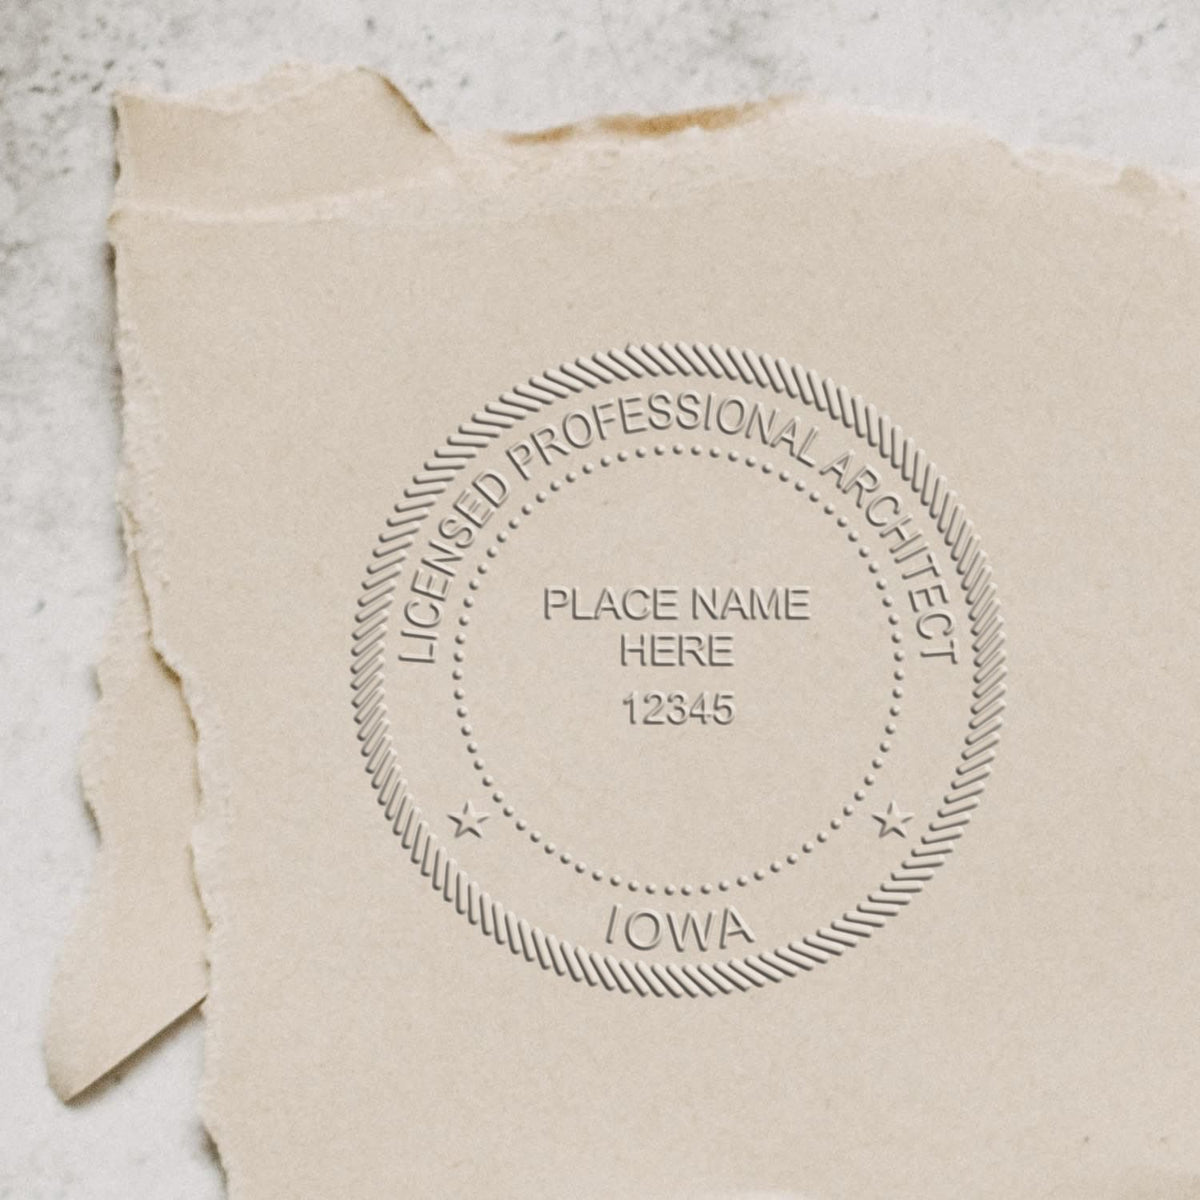 Another Example of a stamped impression of the Heavy Duty Cast Iron Iowa Architect Embosser on a piece of office paper.